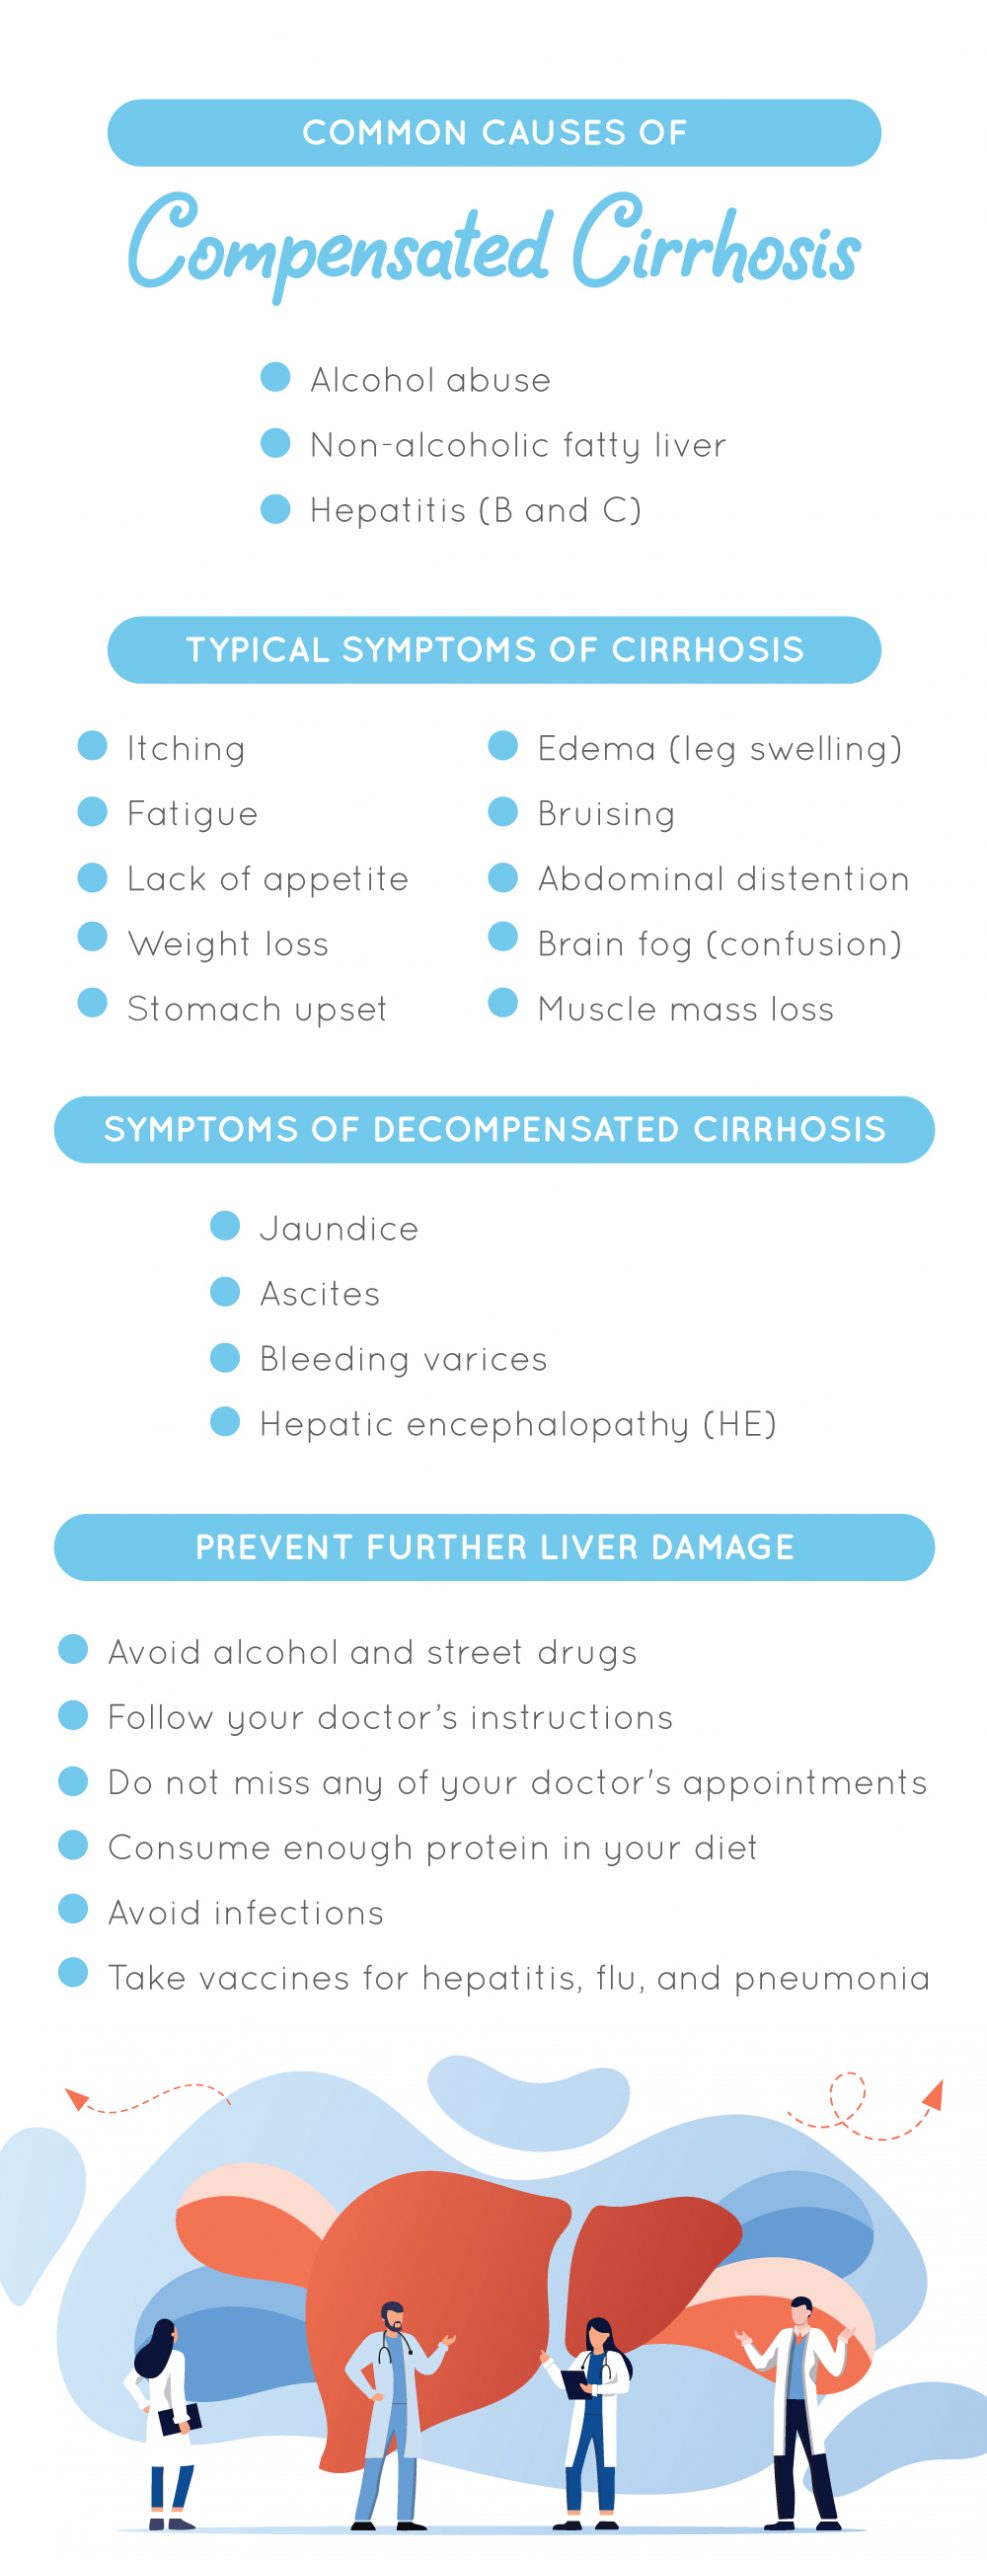 Common causes of compensated cirrhosis